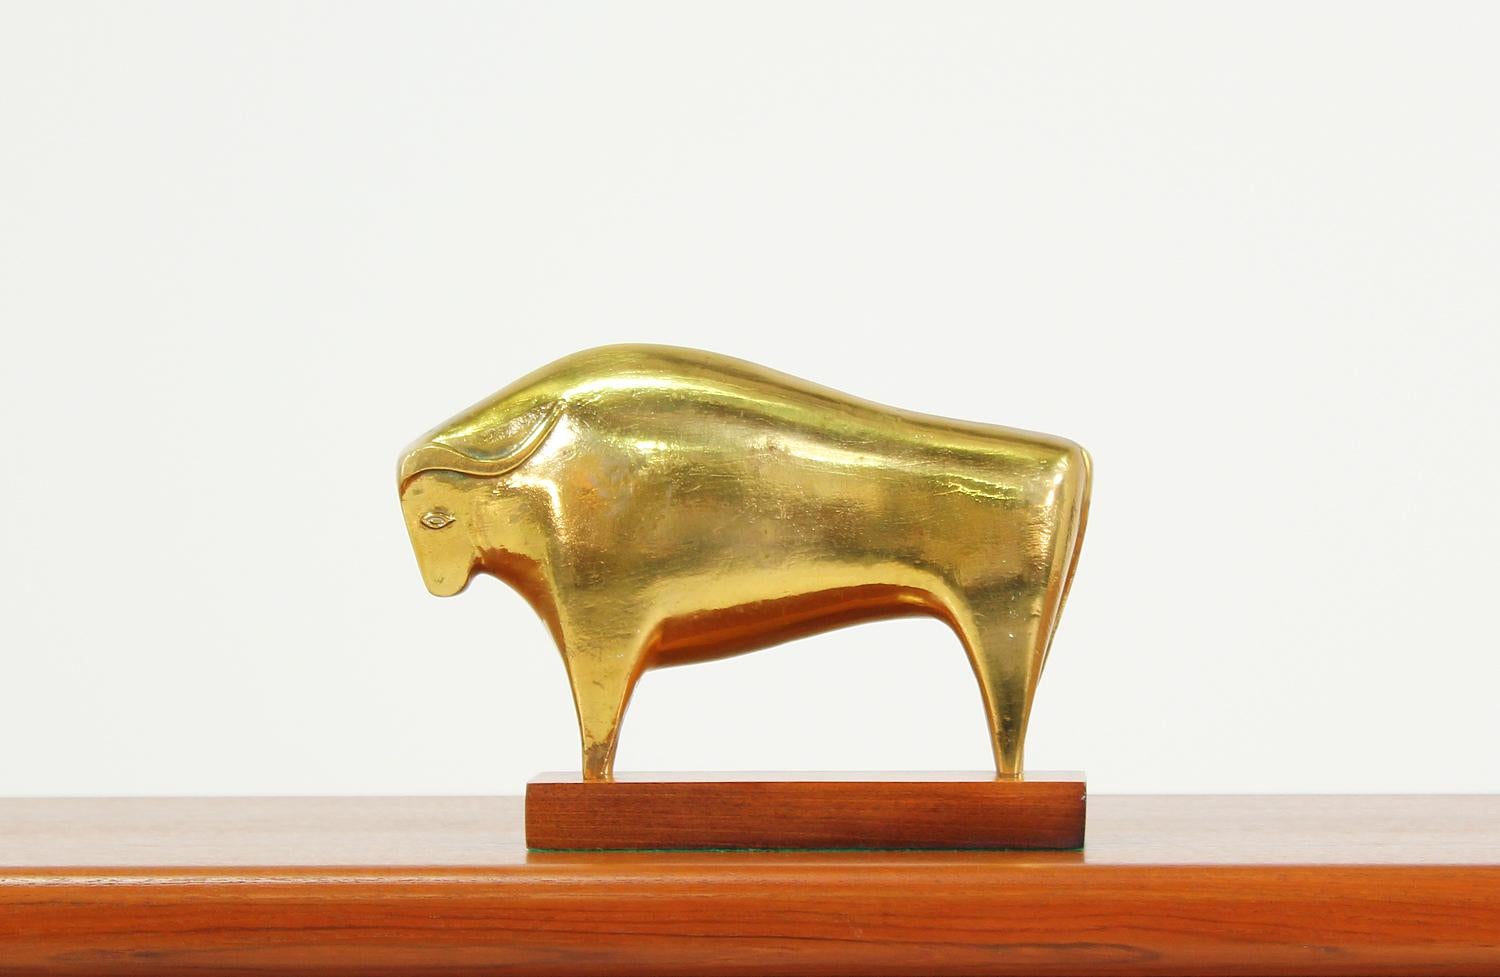 Vintage modernist bull sculpture manufactured in Italy circa 1950’s. This Mid-Century decorative art sculpture features a walnut wood base that supports a bull figurine comprised of brass. The metal shows a beautiful patina consistent with its age.